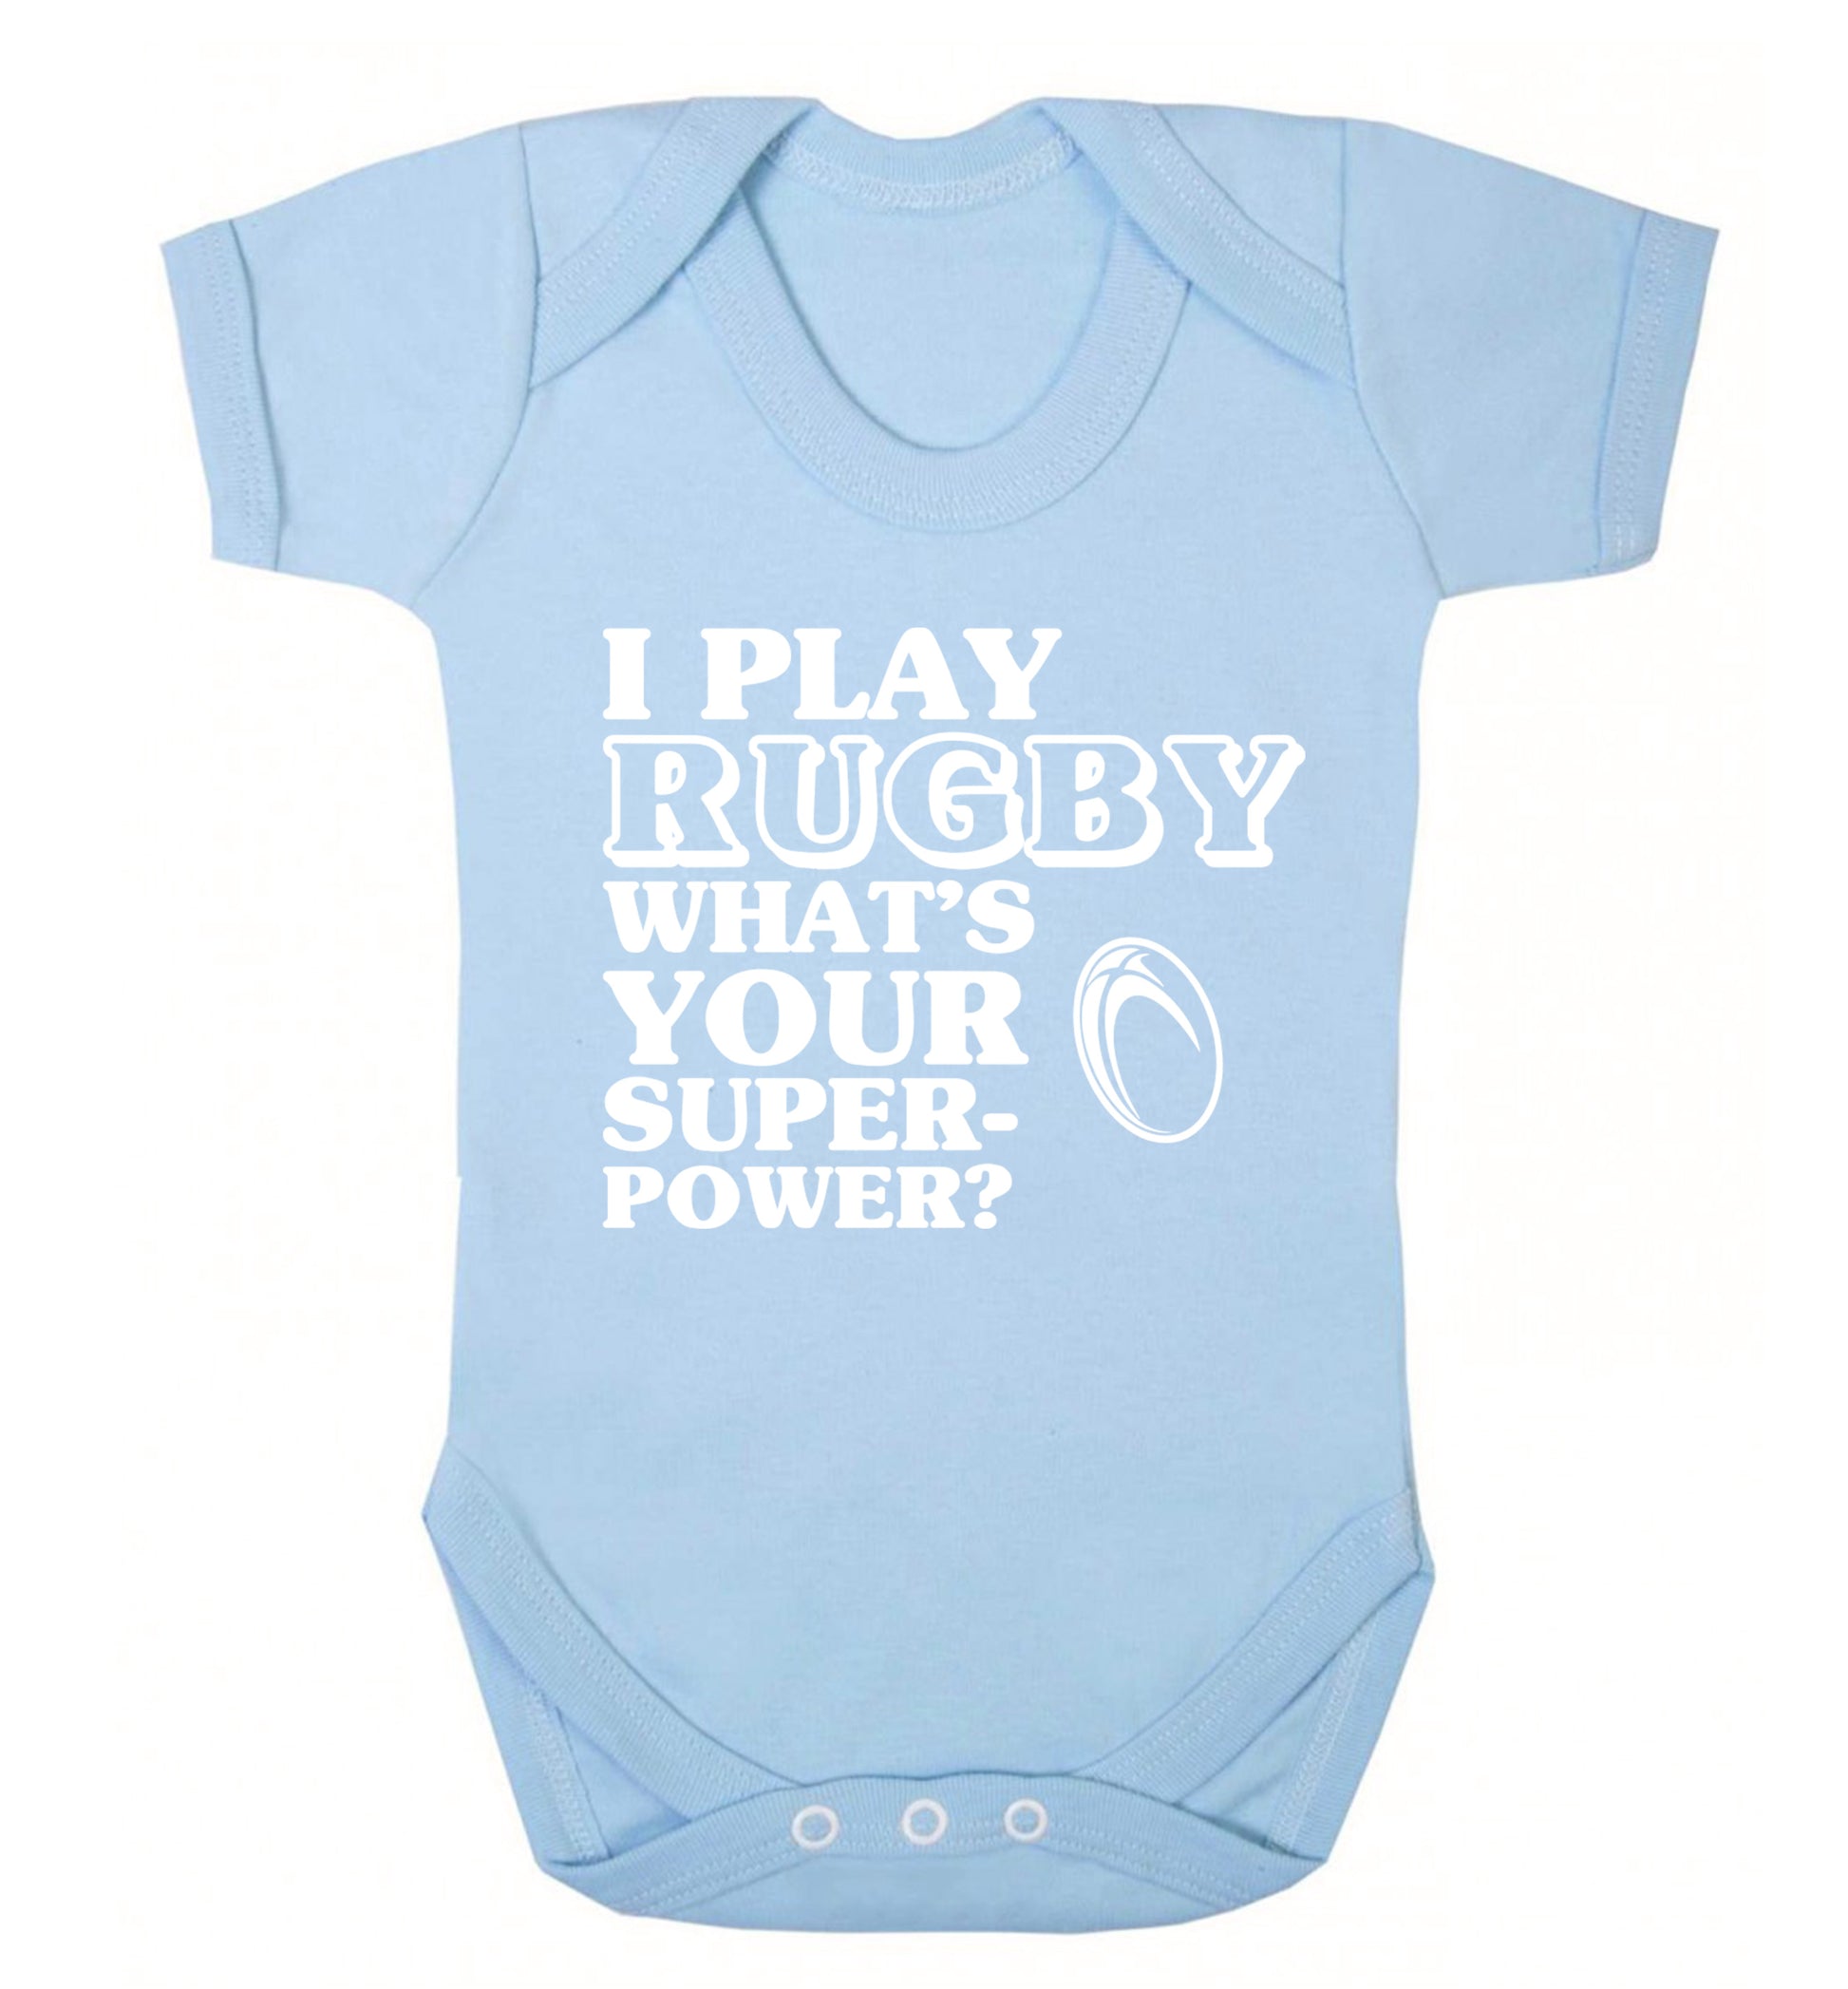 I play rugby what's your superpower? Baby Vest pale blue 18-24 months